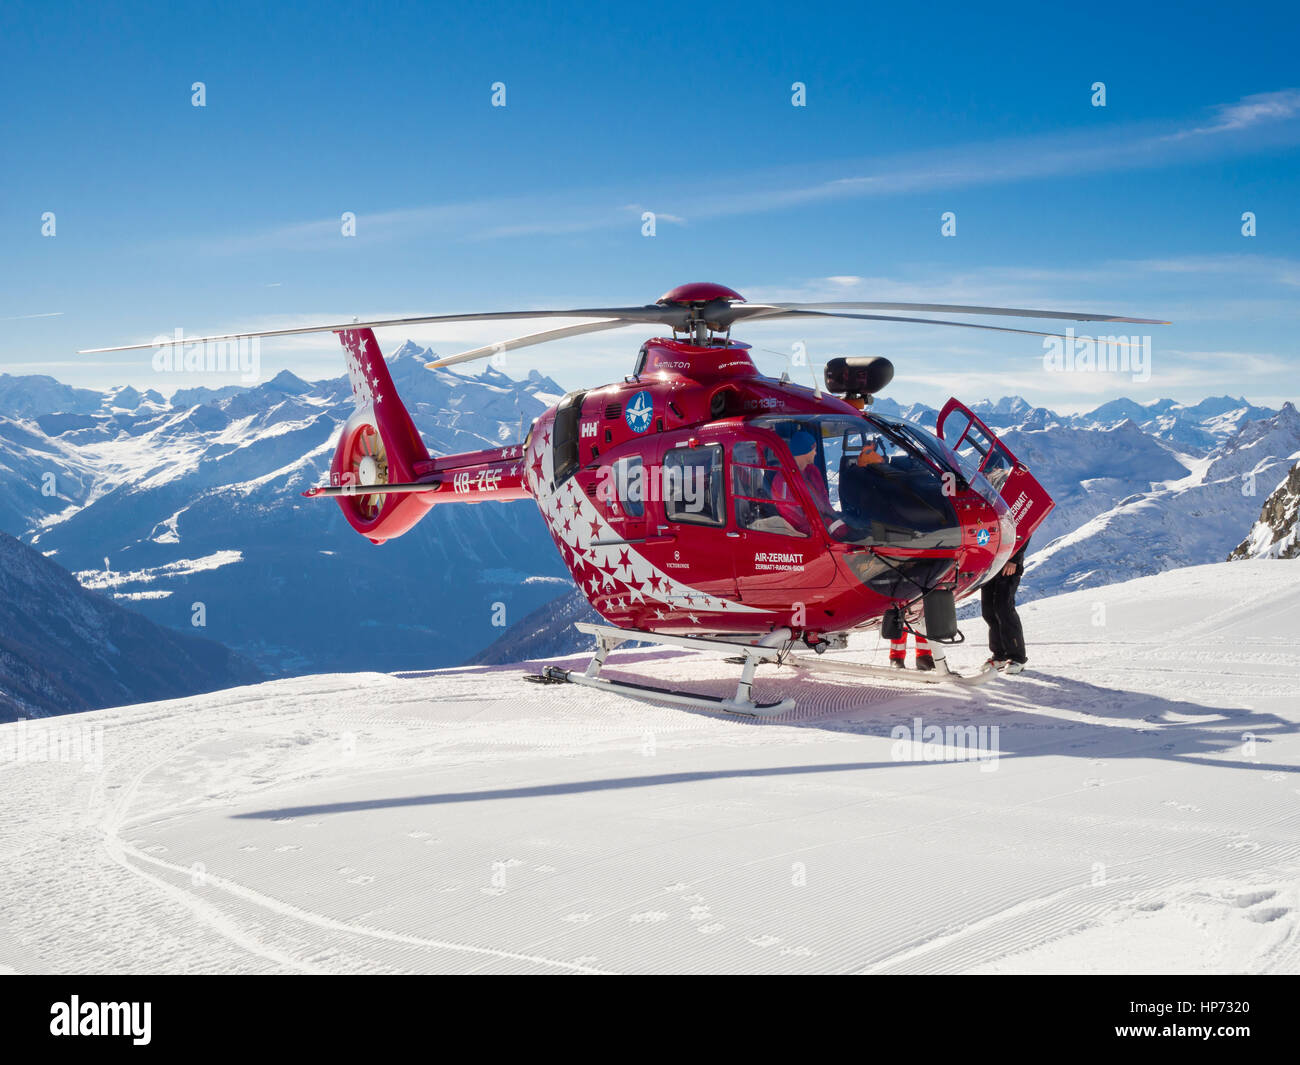 Lauchernalp, Switzerland - 13 February 2017: A Eurocopter EC135 helicopter  of Swiss "Air Zermatt" helicopter airline is landed on the snow covered ski  Stock Photo - Alamy